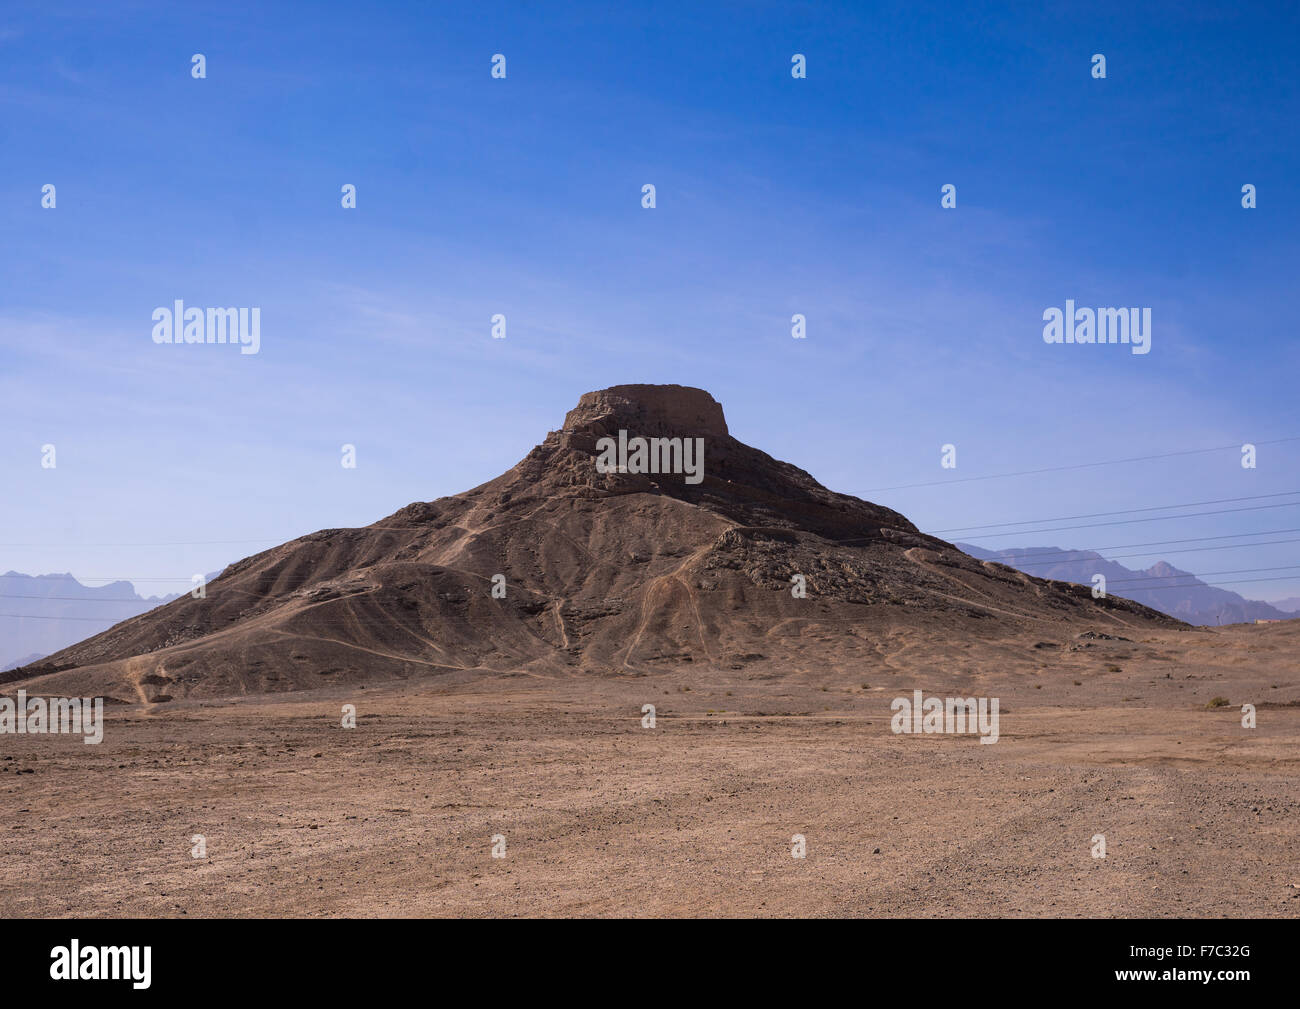 Tower Of Silence Where Zoroastrians Brought Their Dead And Vultures Would Consume The Corpses, Yazd Province, Yazd, Iran Stock Photo